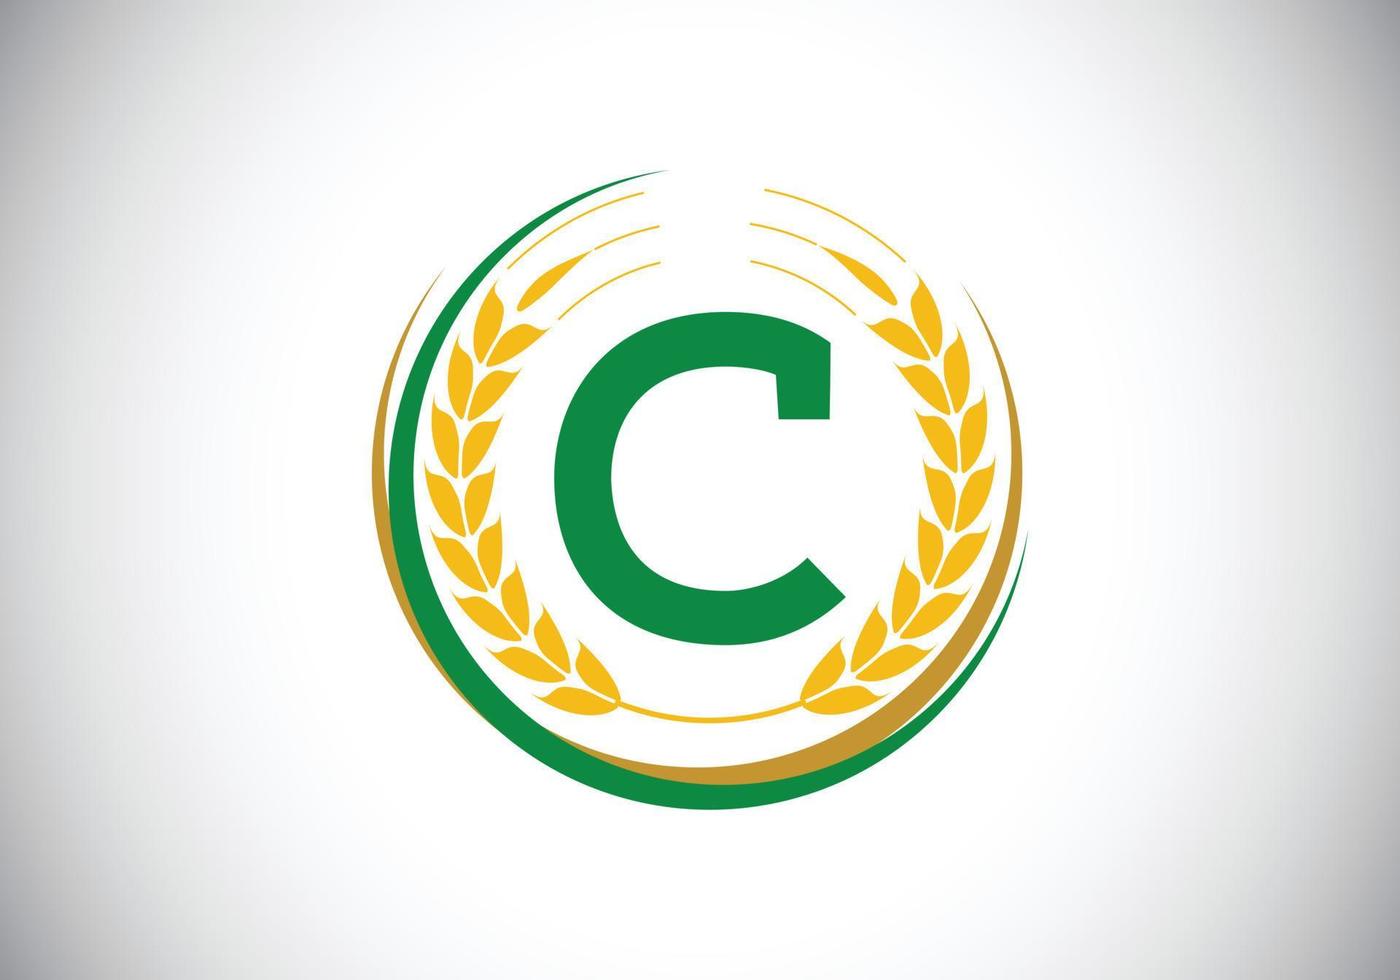 Initial letter C sign symbol with wheat ears wreath. Organic wheat farming logo design concept. Agriculture logo design vector template.